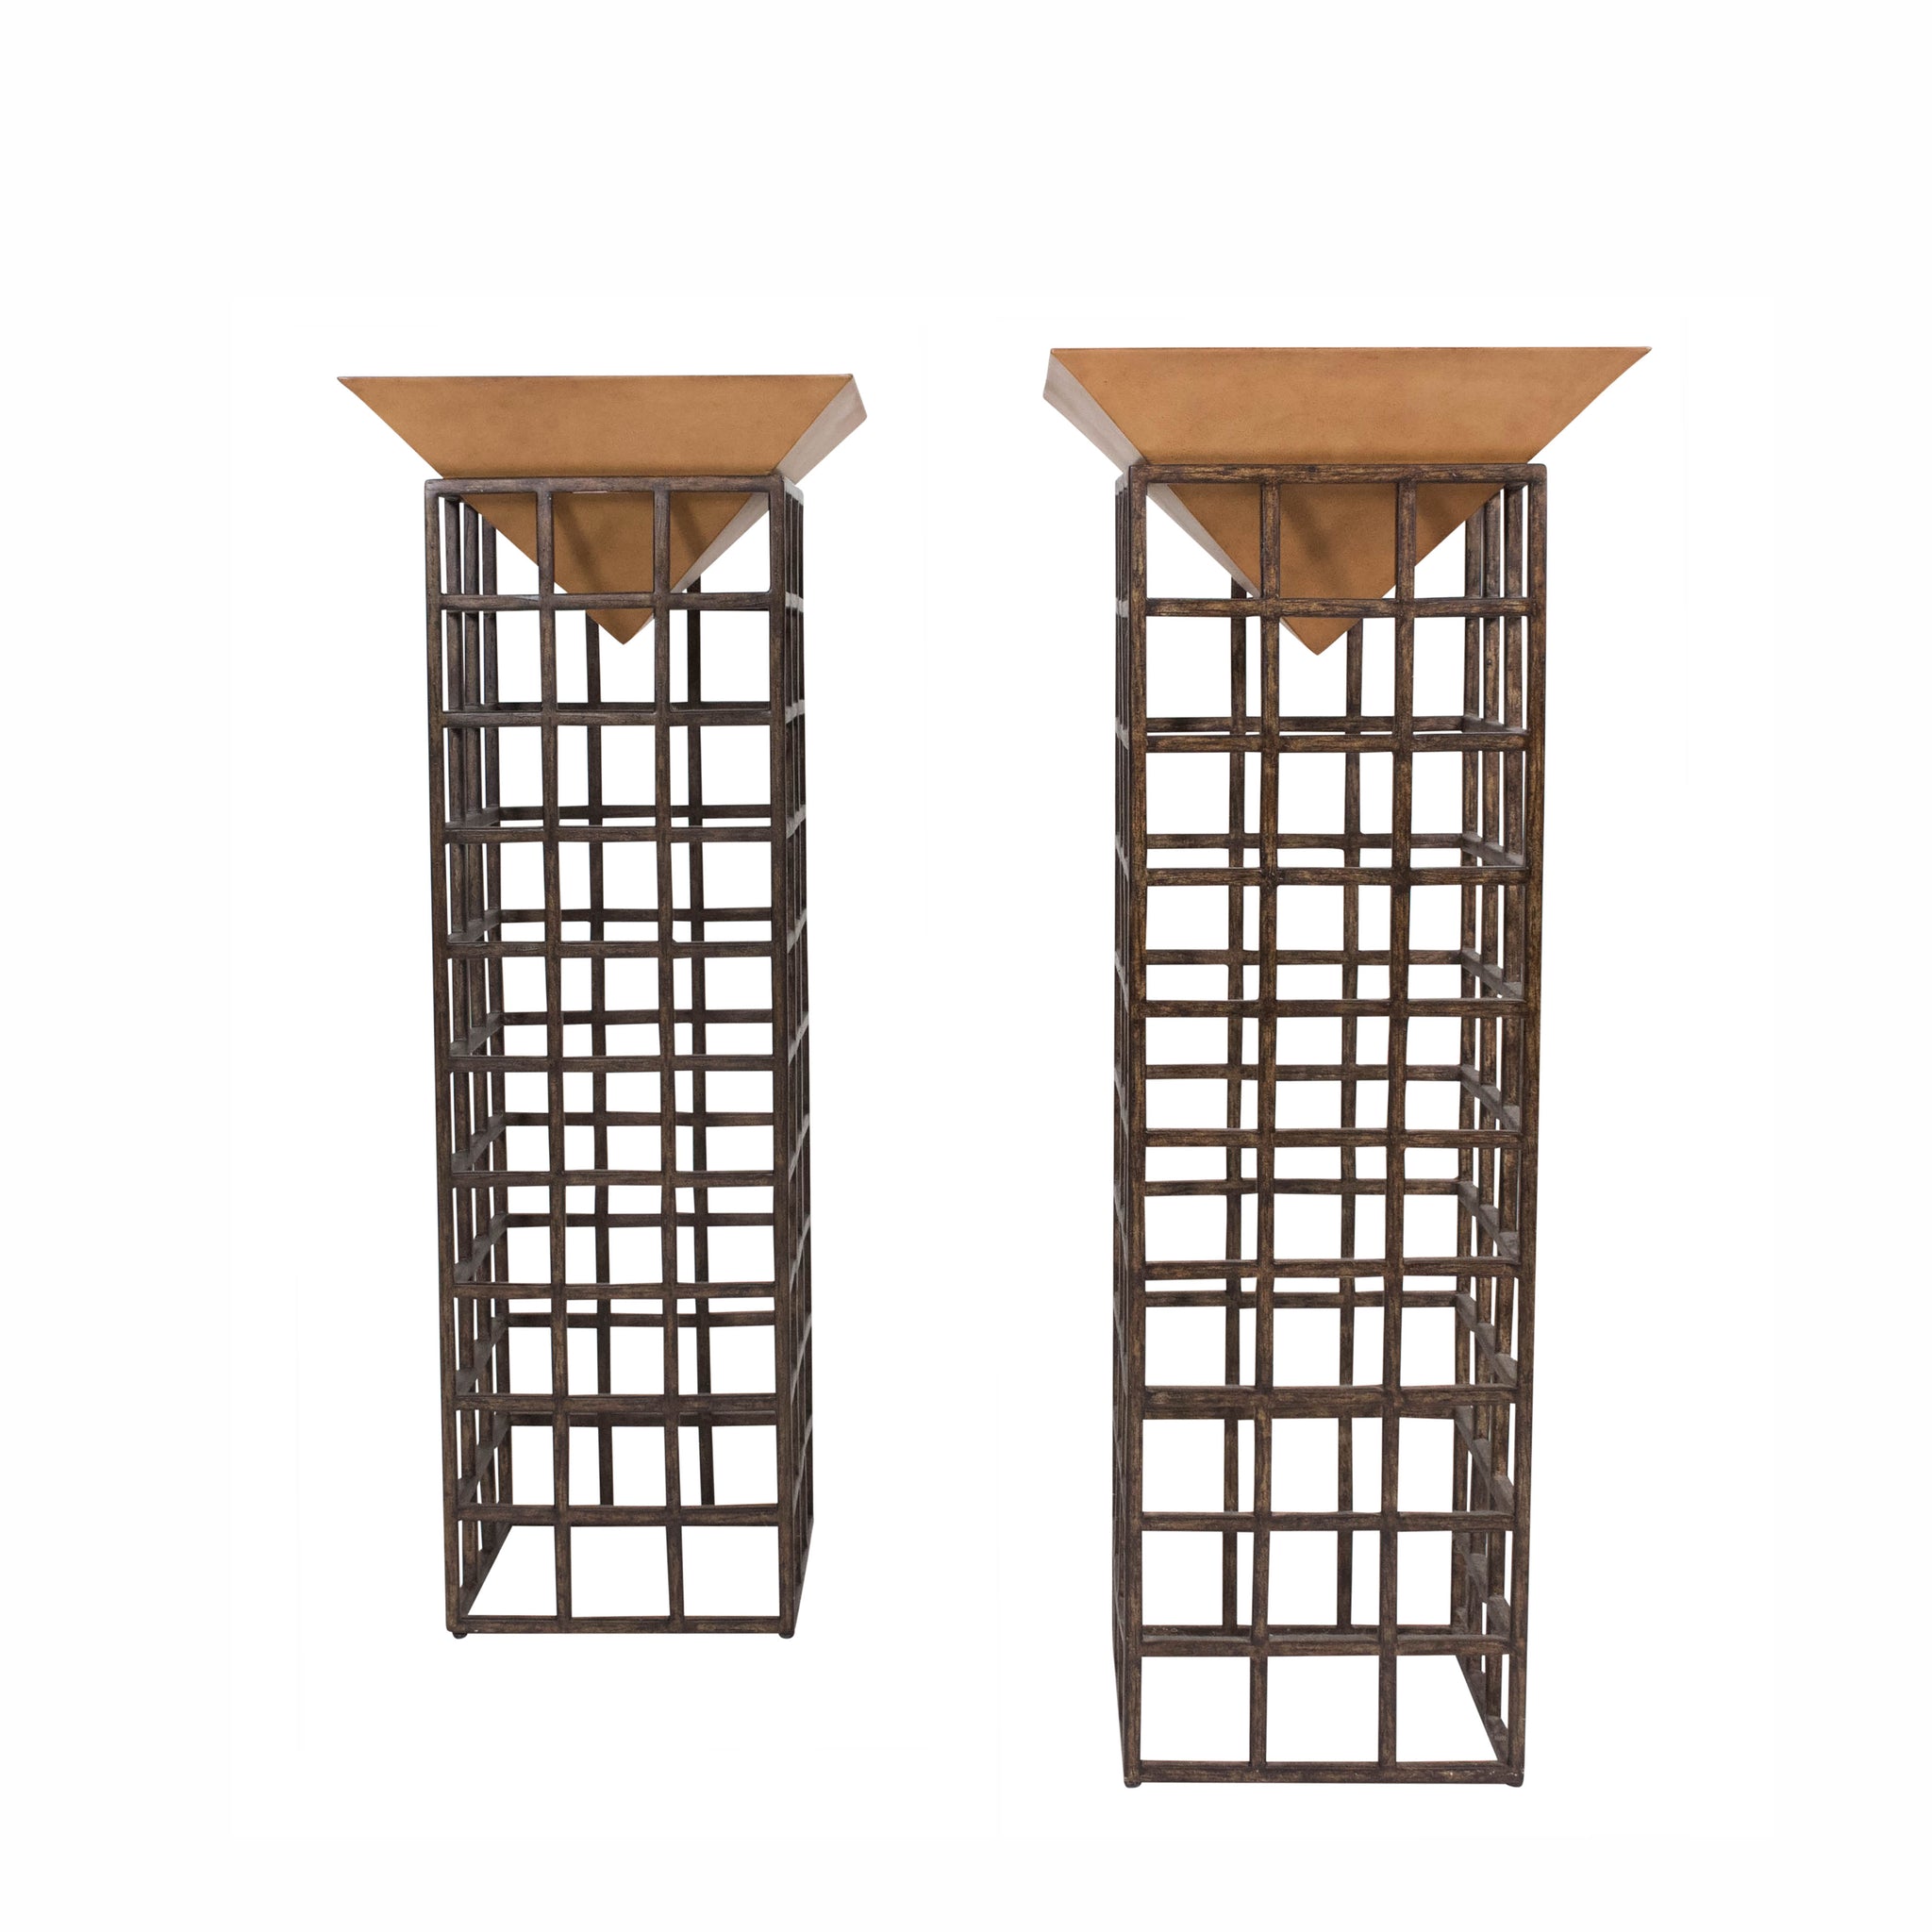 A Pair of Unusual Pyramid Mounted Pedestals